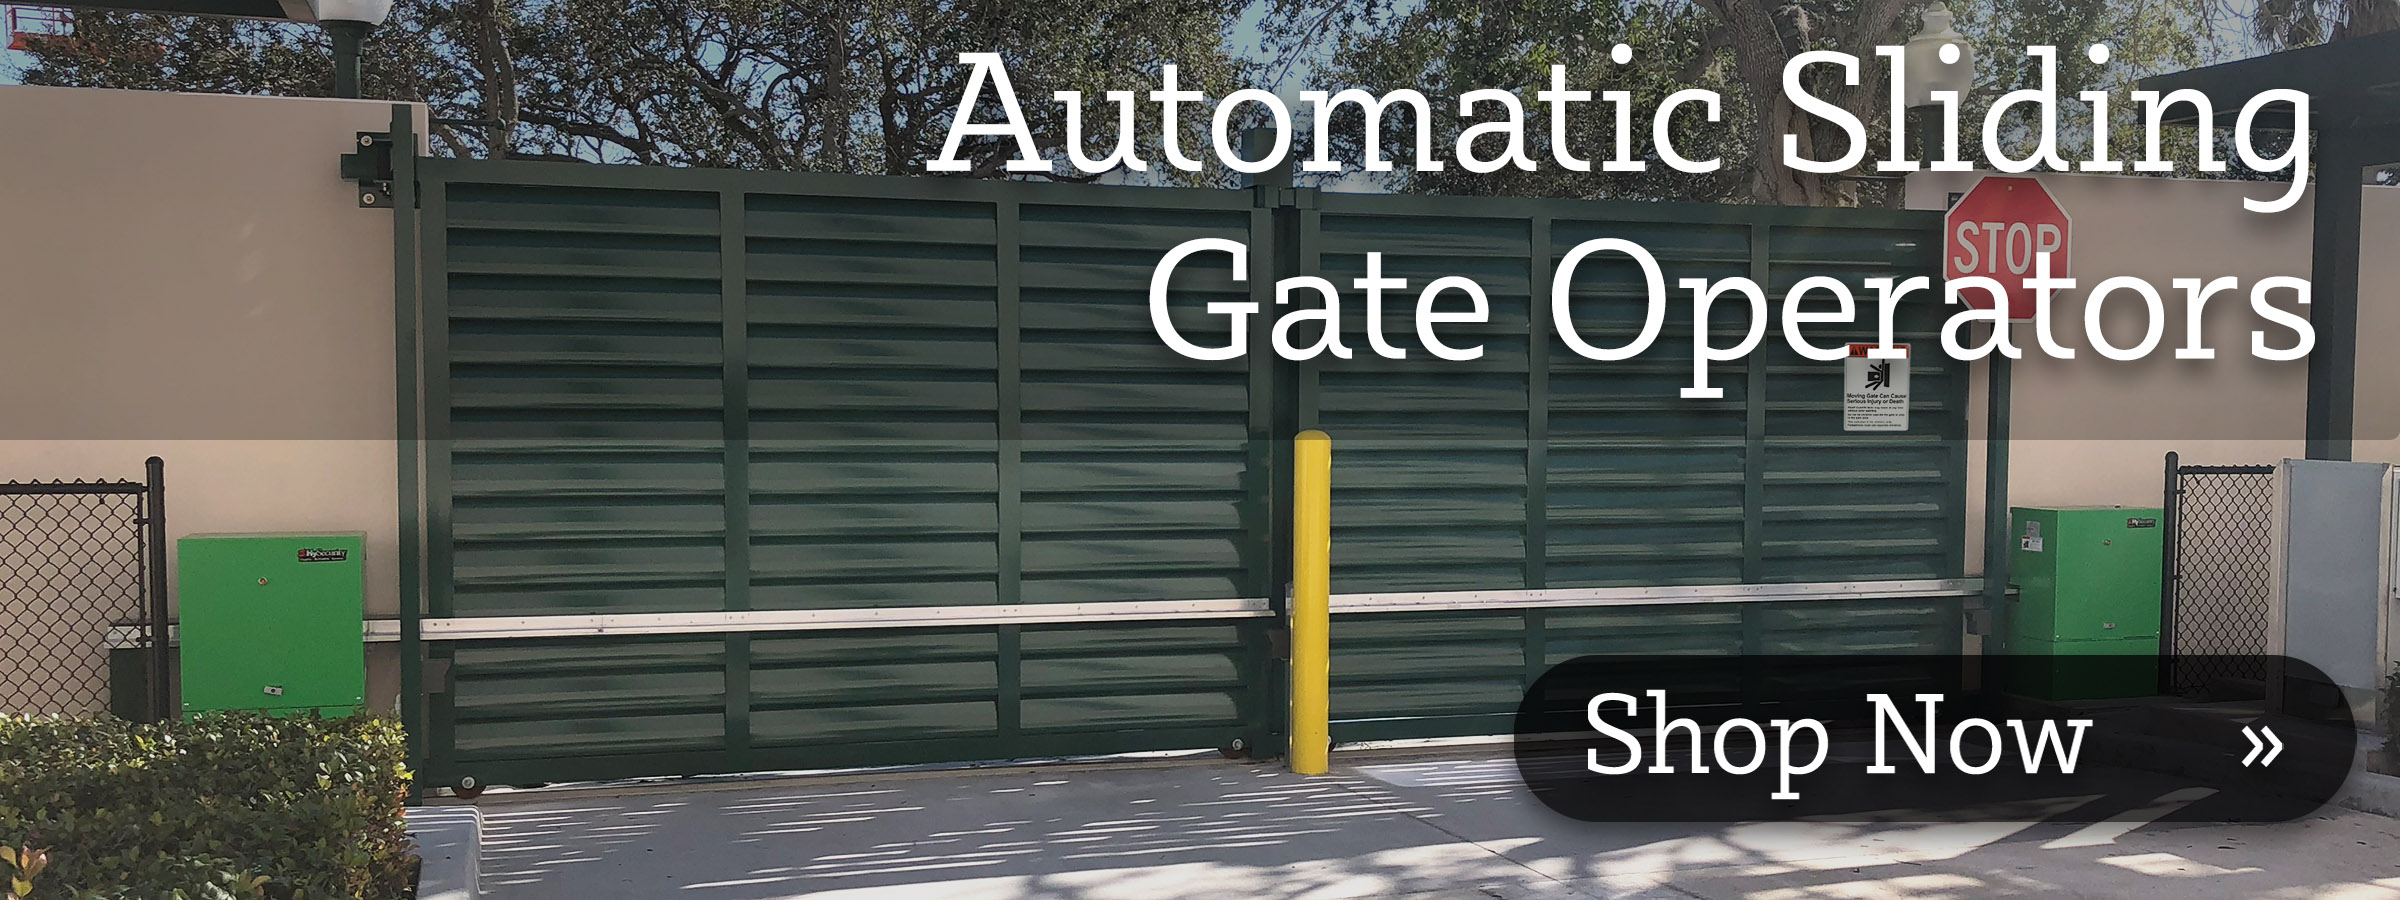 Shop HySecurity Automatic Sliding Gate Openers